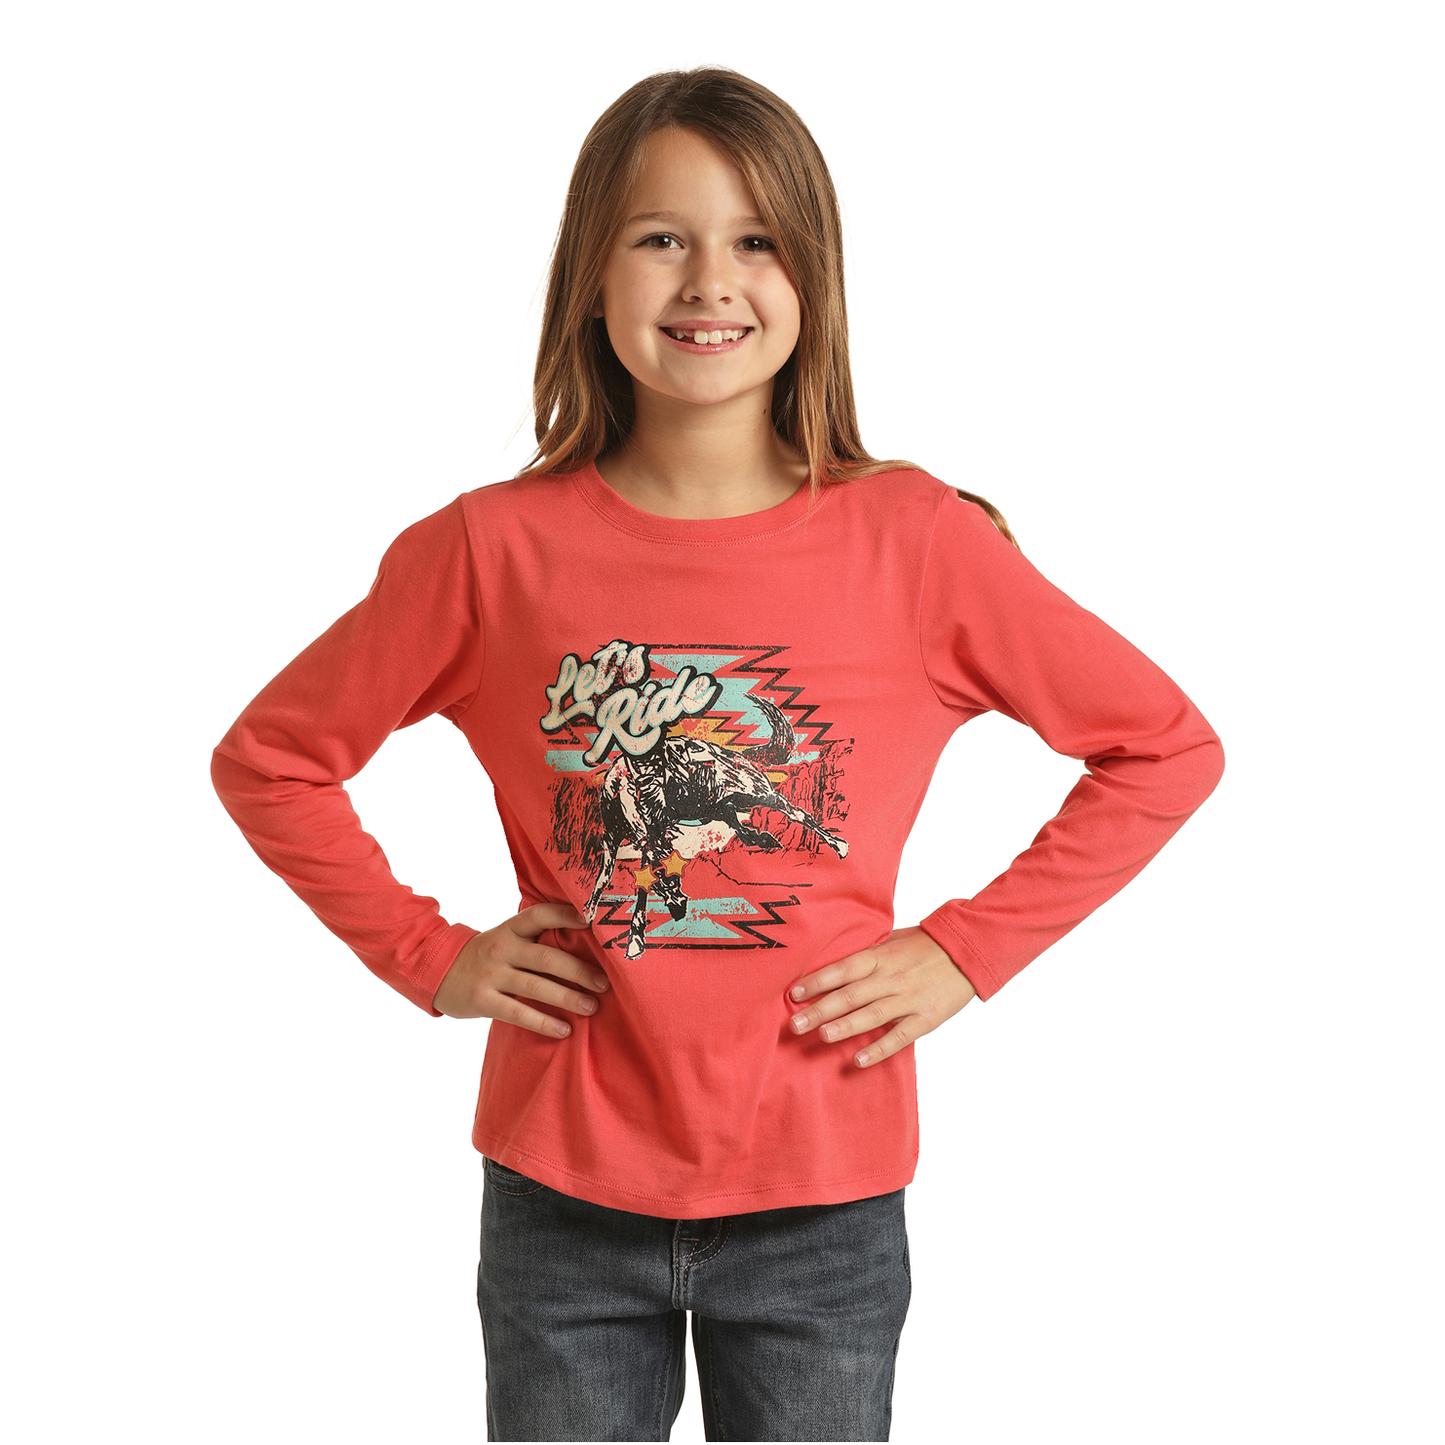 Rock & Roll® Youth Girl's Basic Pink Graphic T-Shirt RRGT22R070-67